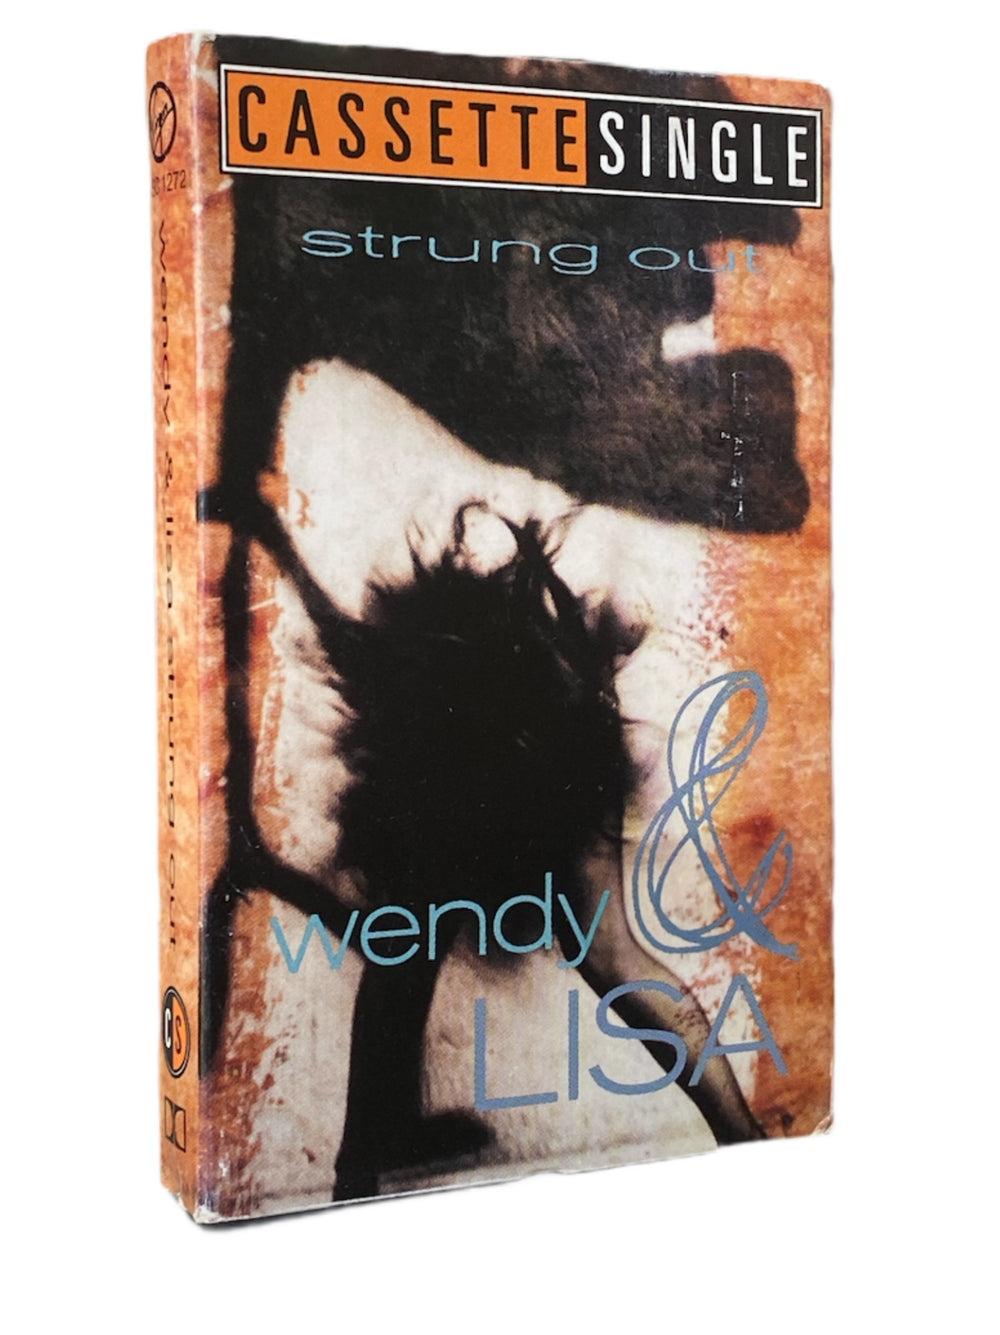 Prince – Wendy & Lisa Strung Out Cassette Single UK Release Prince